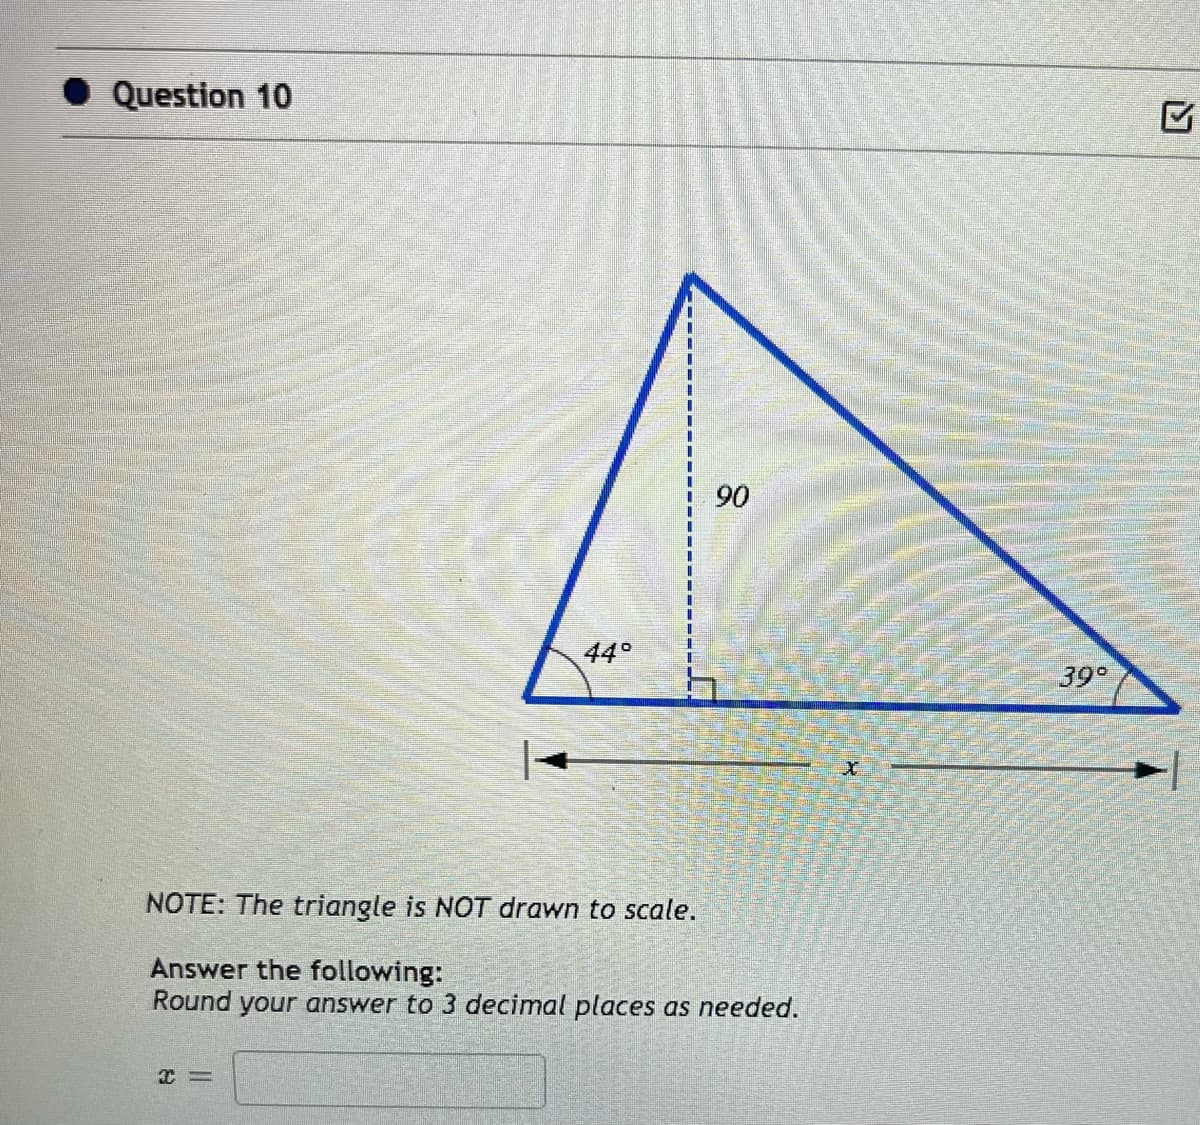 ◆ Question 10
44°
X=
90
NOTE: The triangle is NOT drawn to scale.
Answer the following:
Round your answer to 3 decimal places as needed.
X
39°